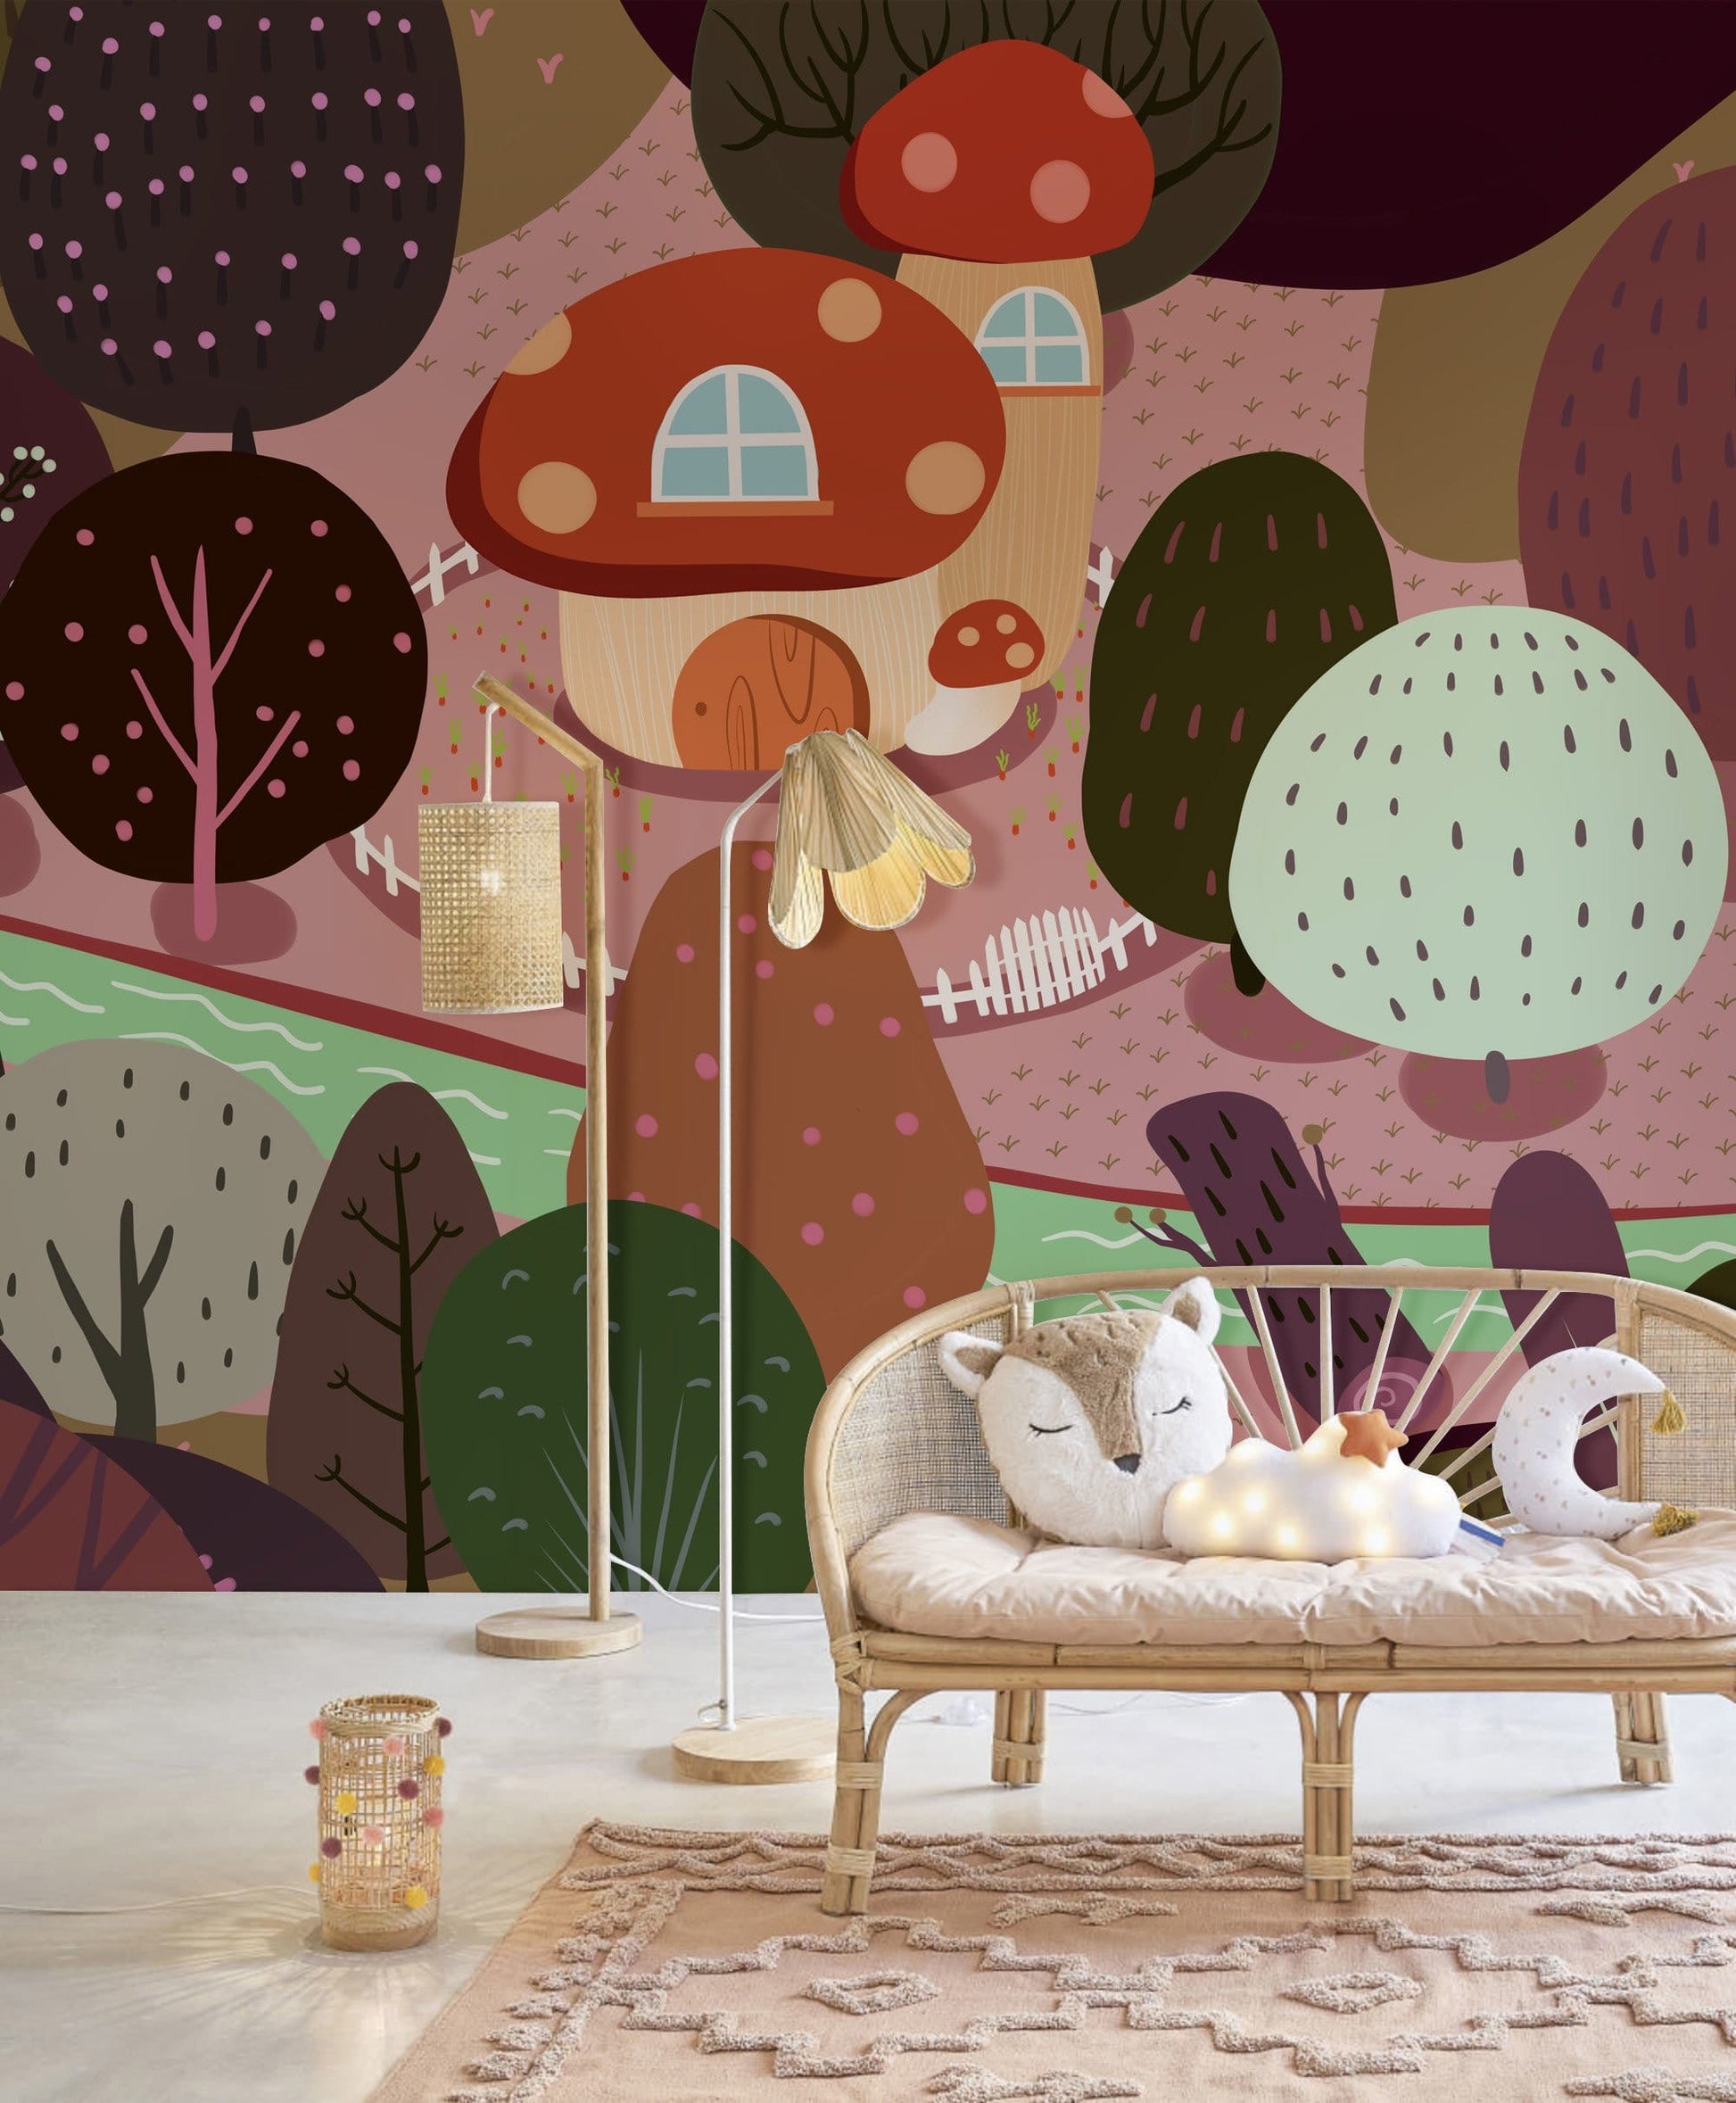 Trees in Cartoon Style Wallpaper Mural for Decorating the Living Room